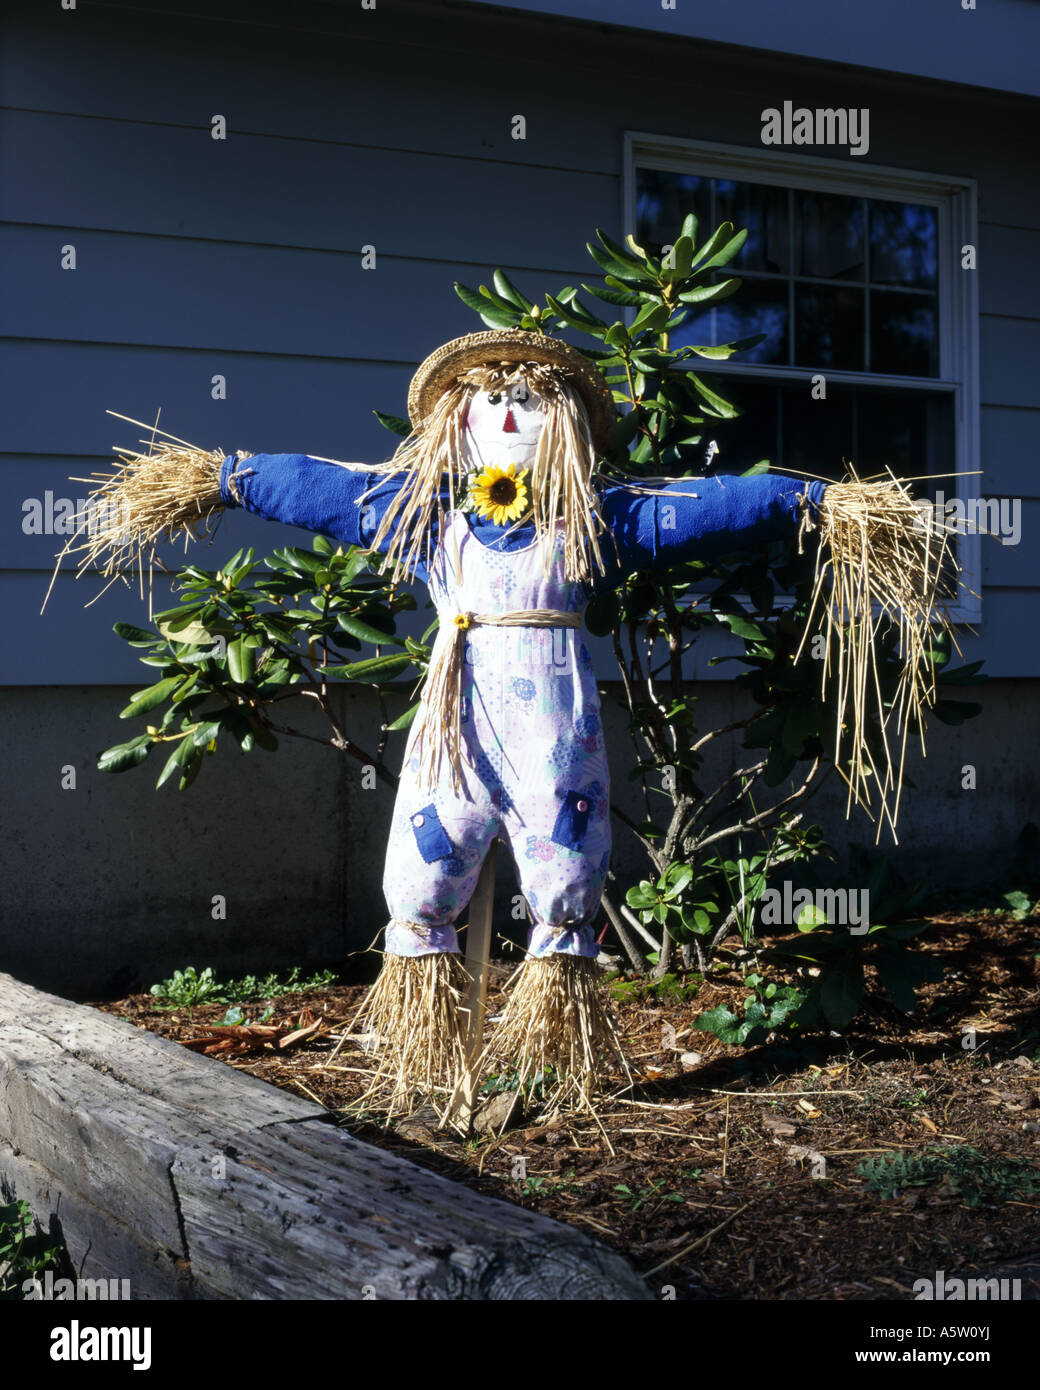 Scarecrow made of straw standing in a front garden in preparation for halloween,Martha's Vineyard,Massachusetts,U.S.A. Stock Photo